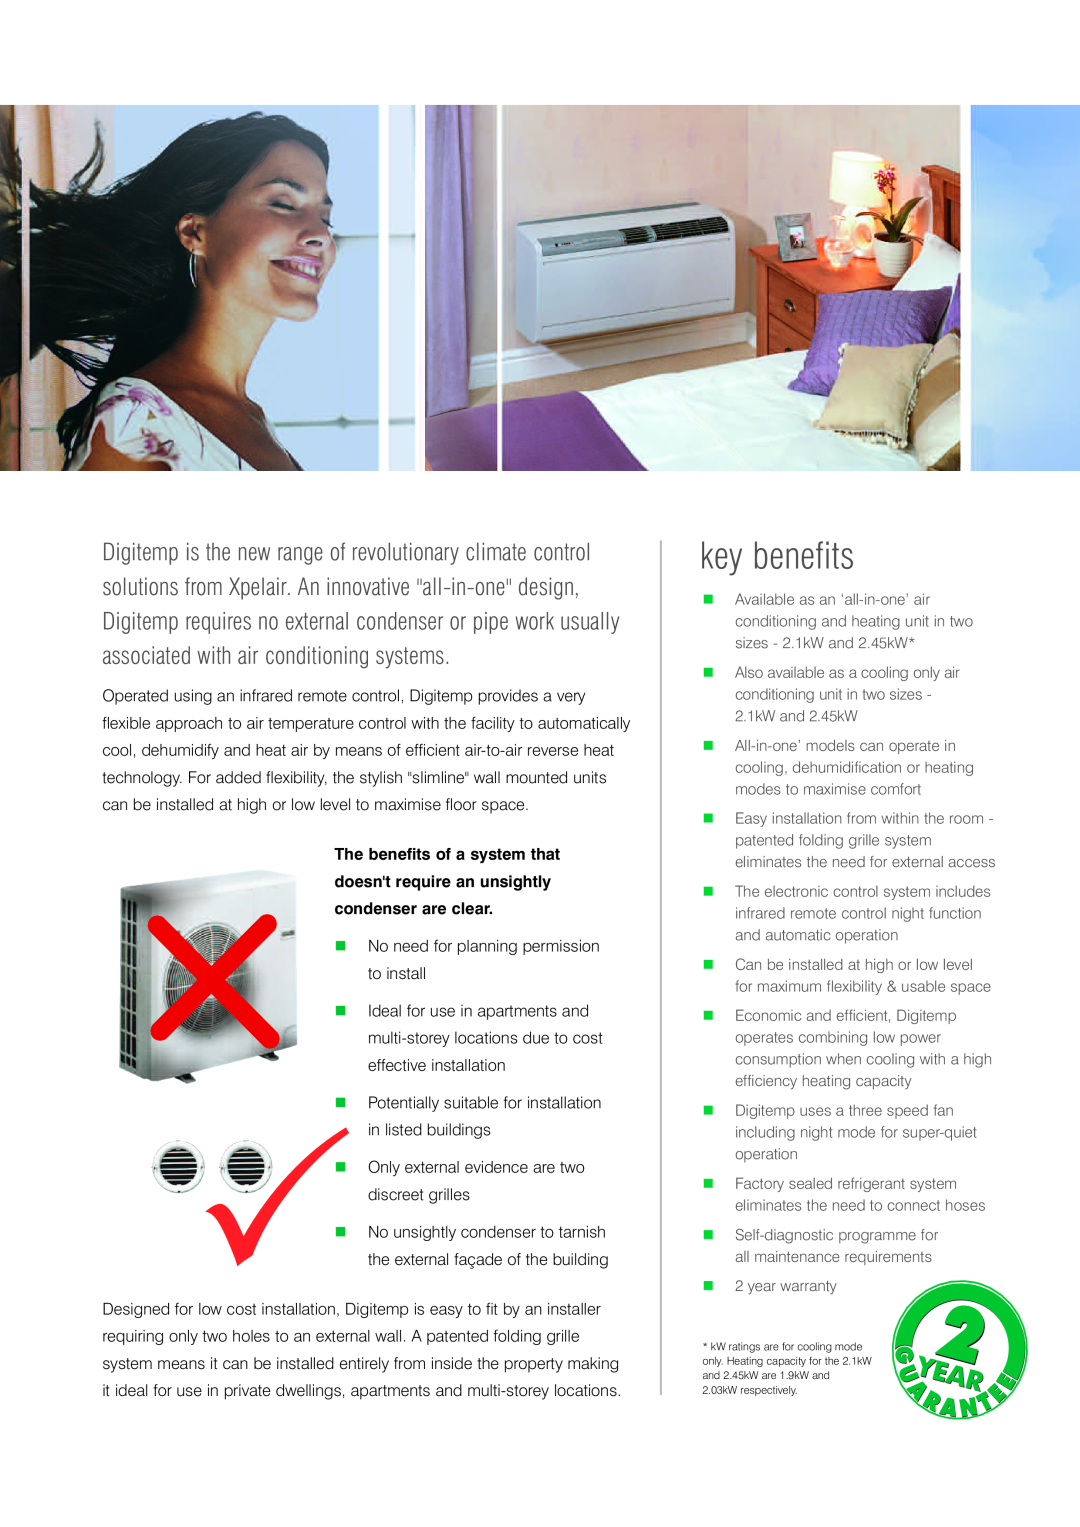 Xpelair Digitemp key benefits, The benefits of a system that, doesnt require an unsightly condenser are clear, ν ν ν ν 